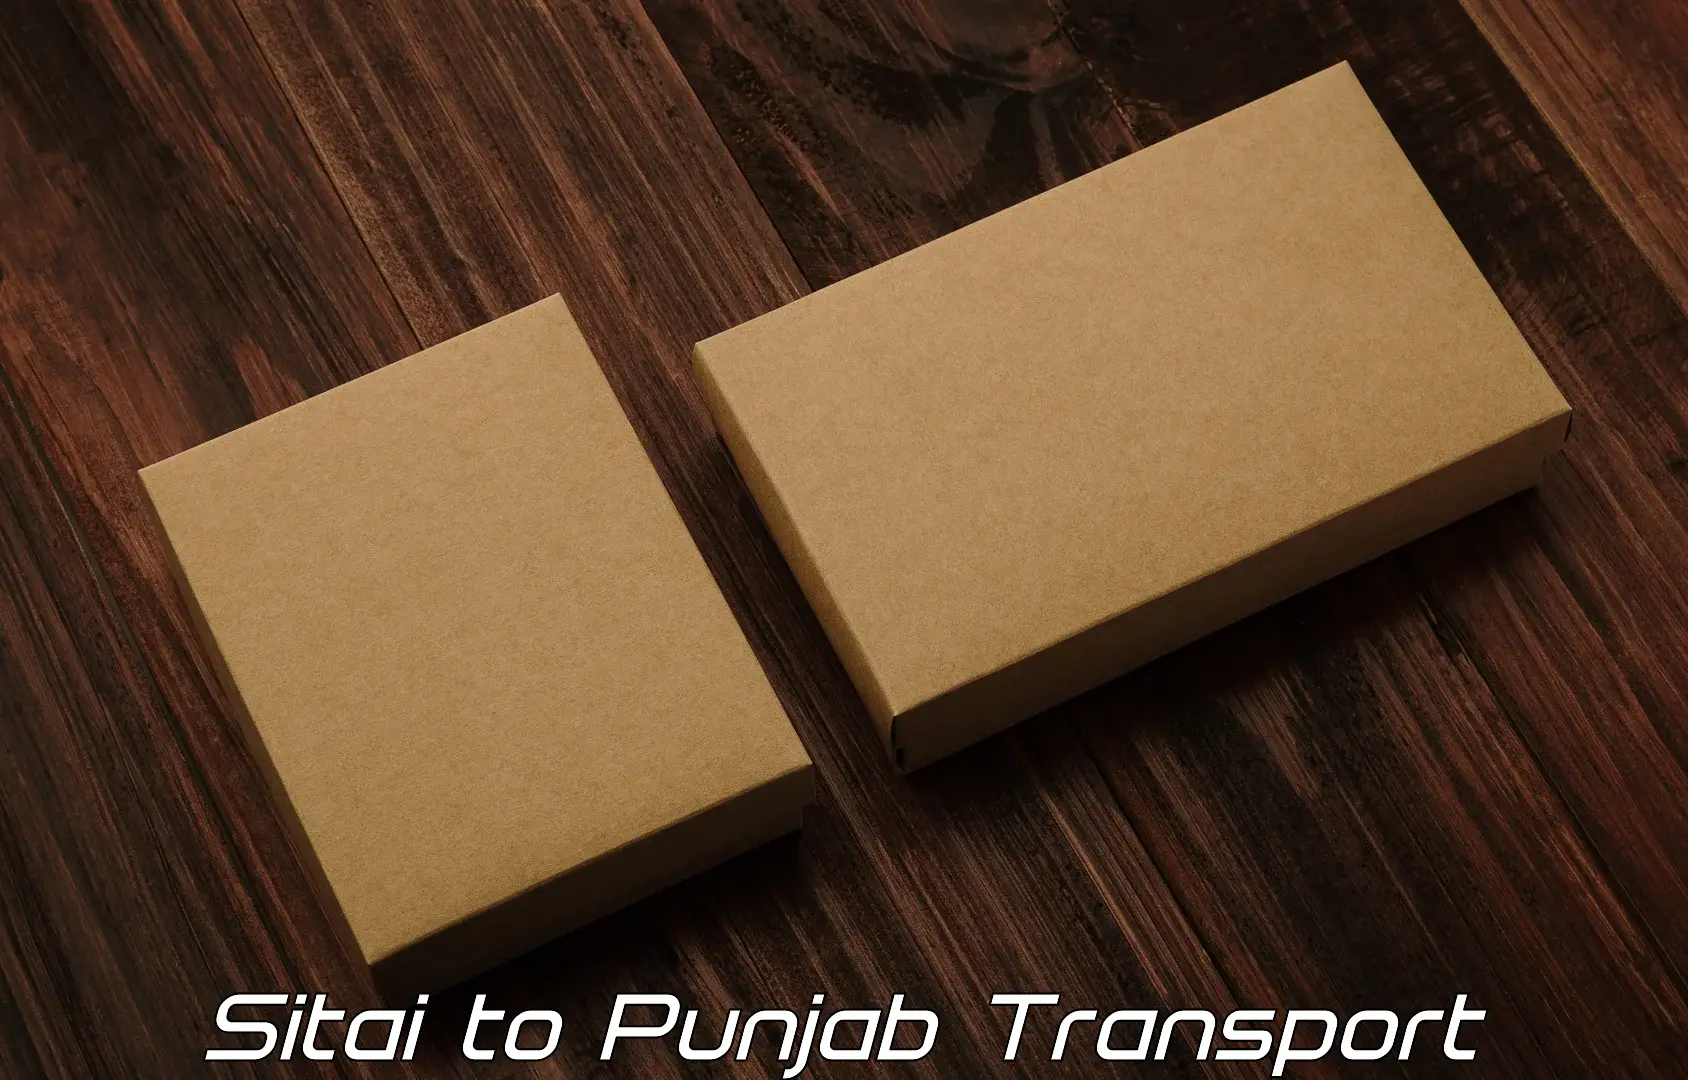 Best transport services in India Sitai to Punjab